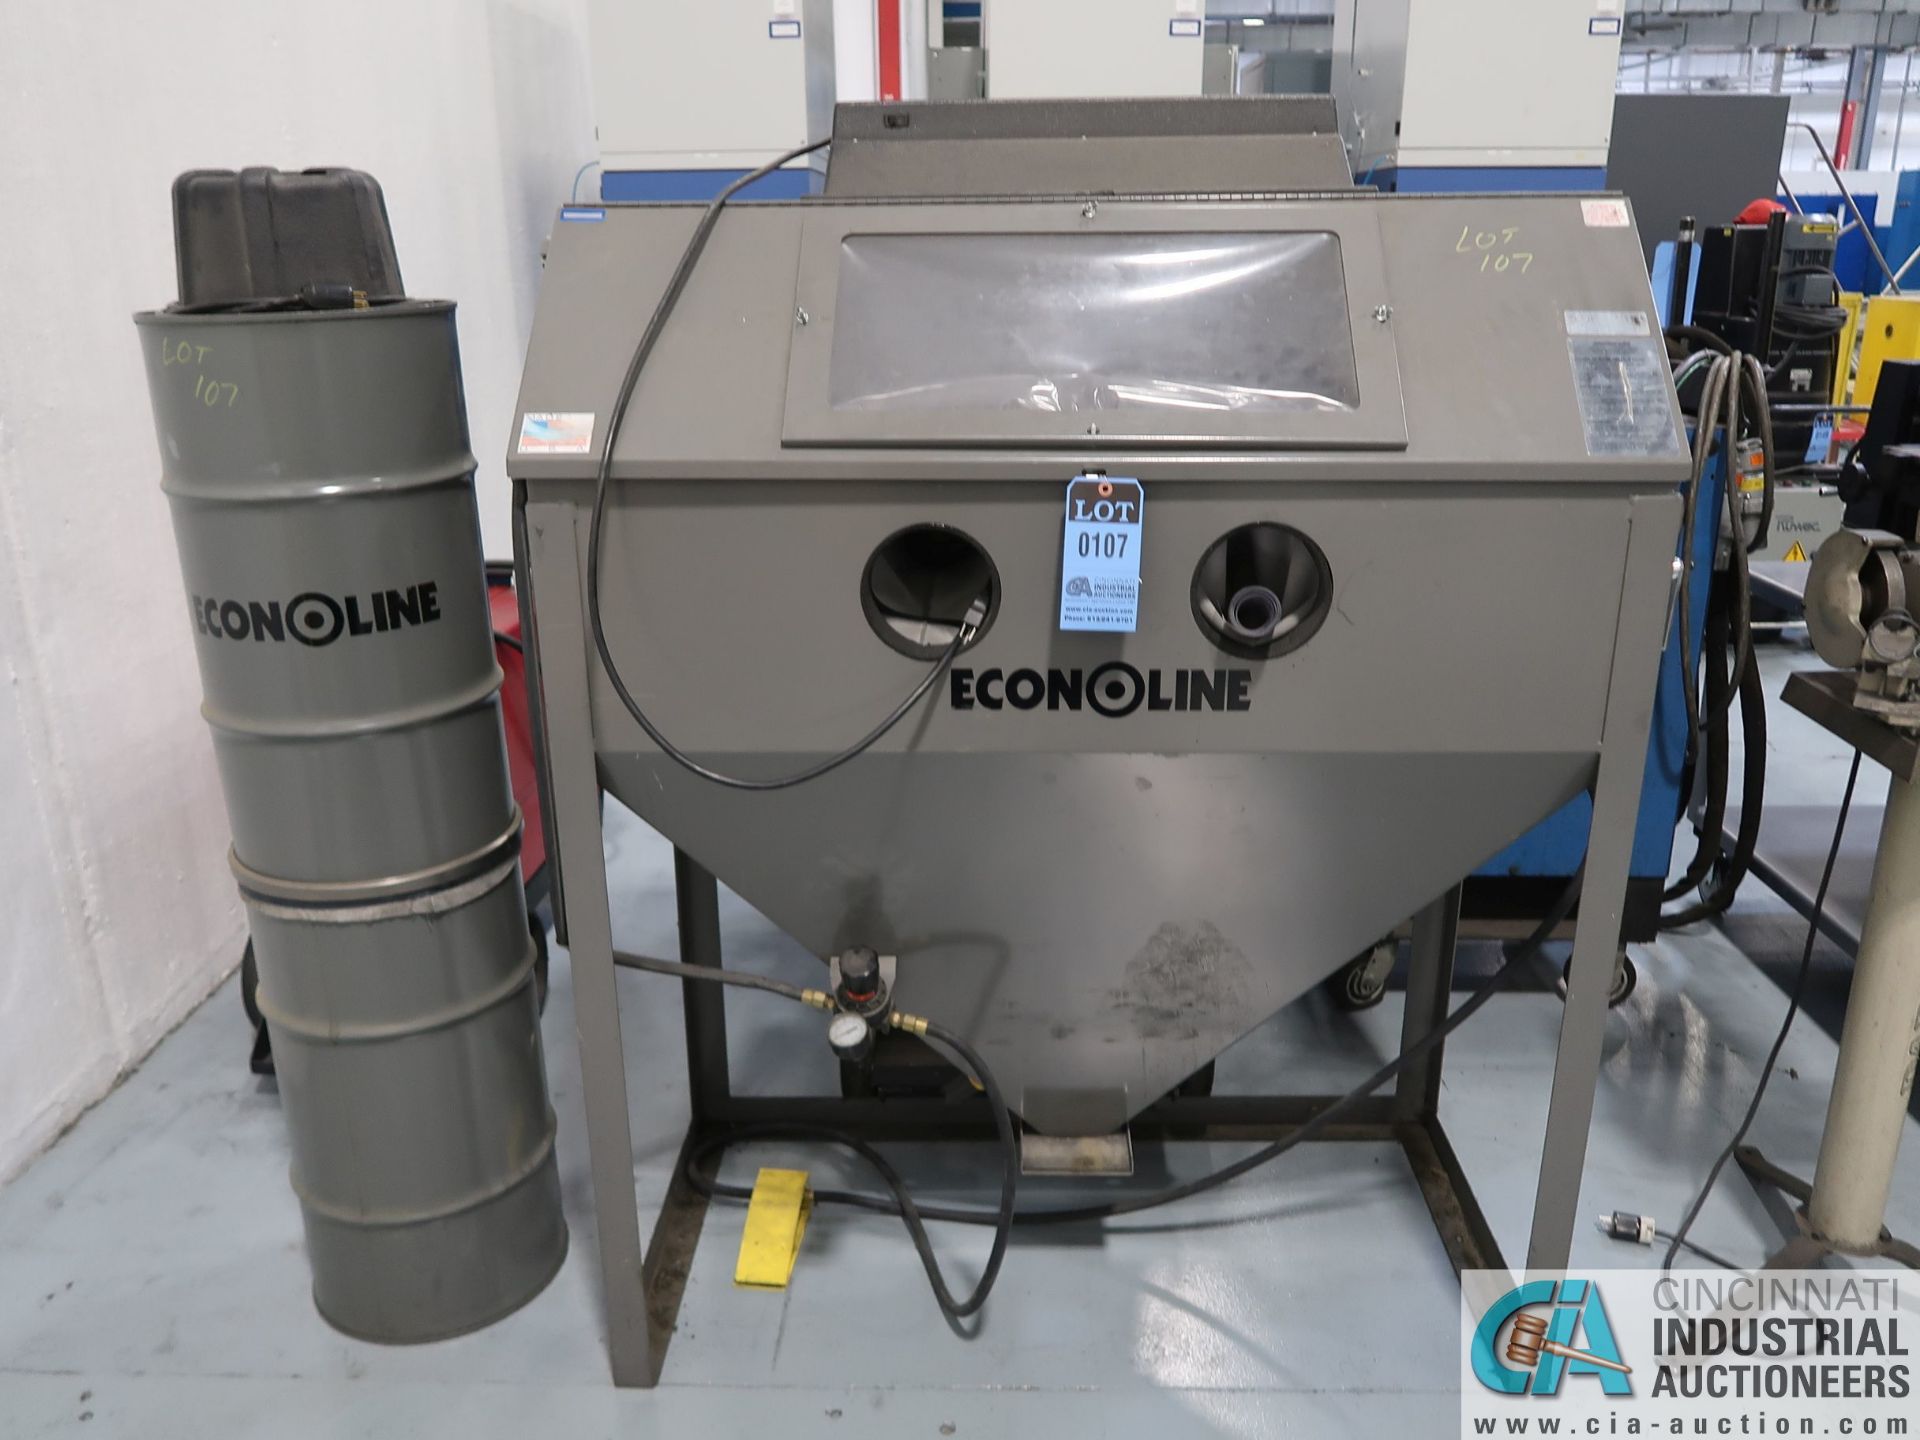 ECONOLINE ABRASIVE BLAST CABINET WITH DUST COLLECTOR; S/N N/A, FOOT CONTROL *$50.00 RIGGING FEE